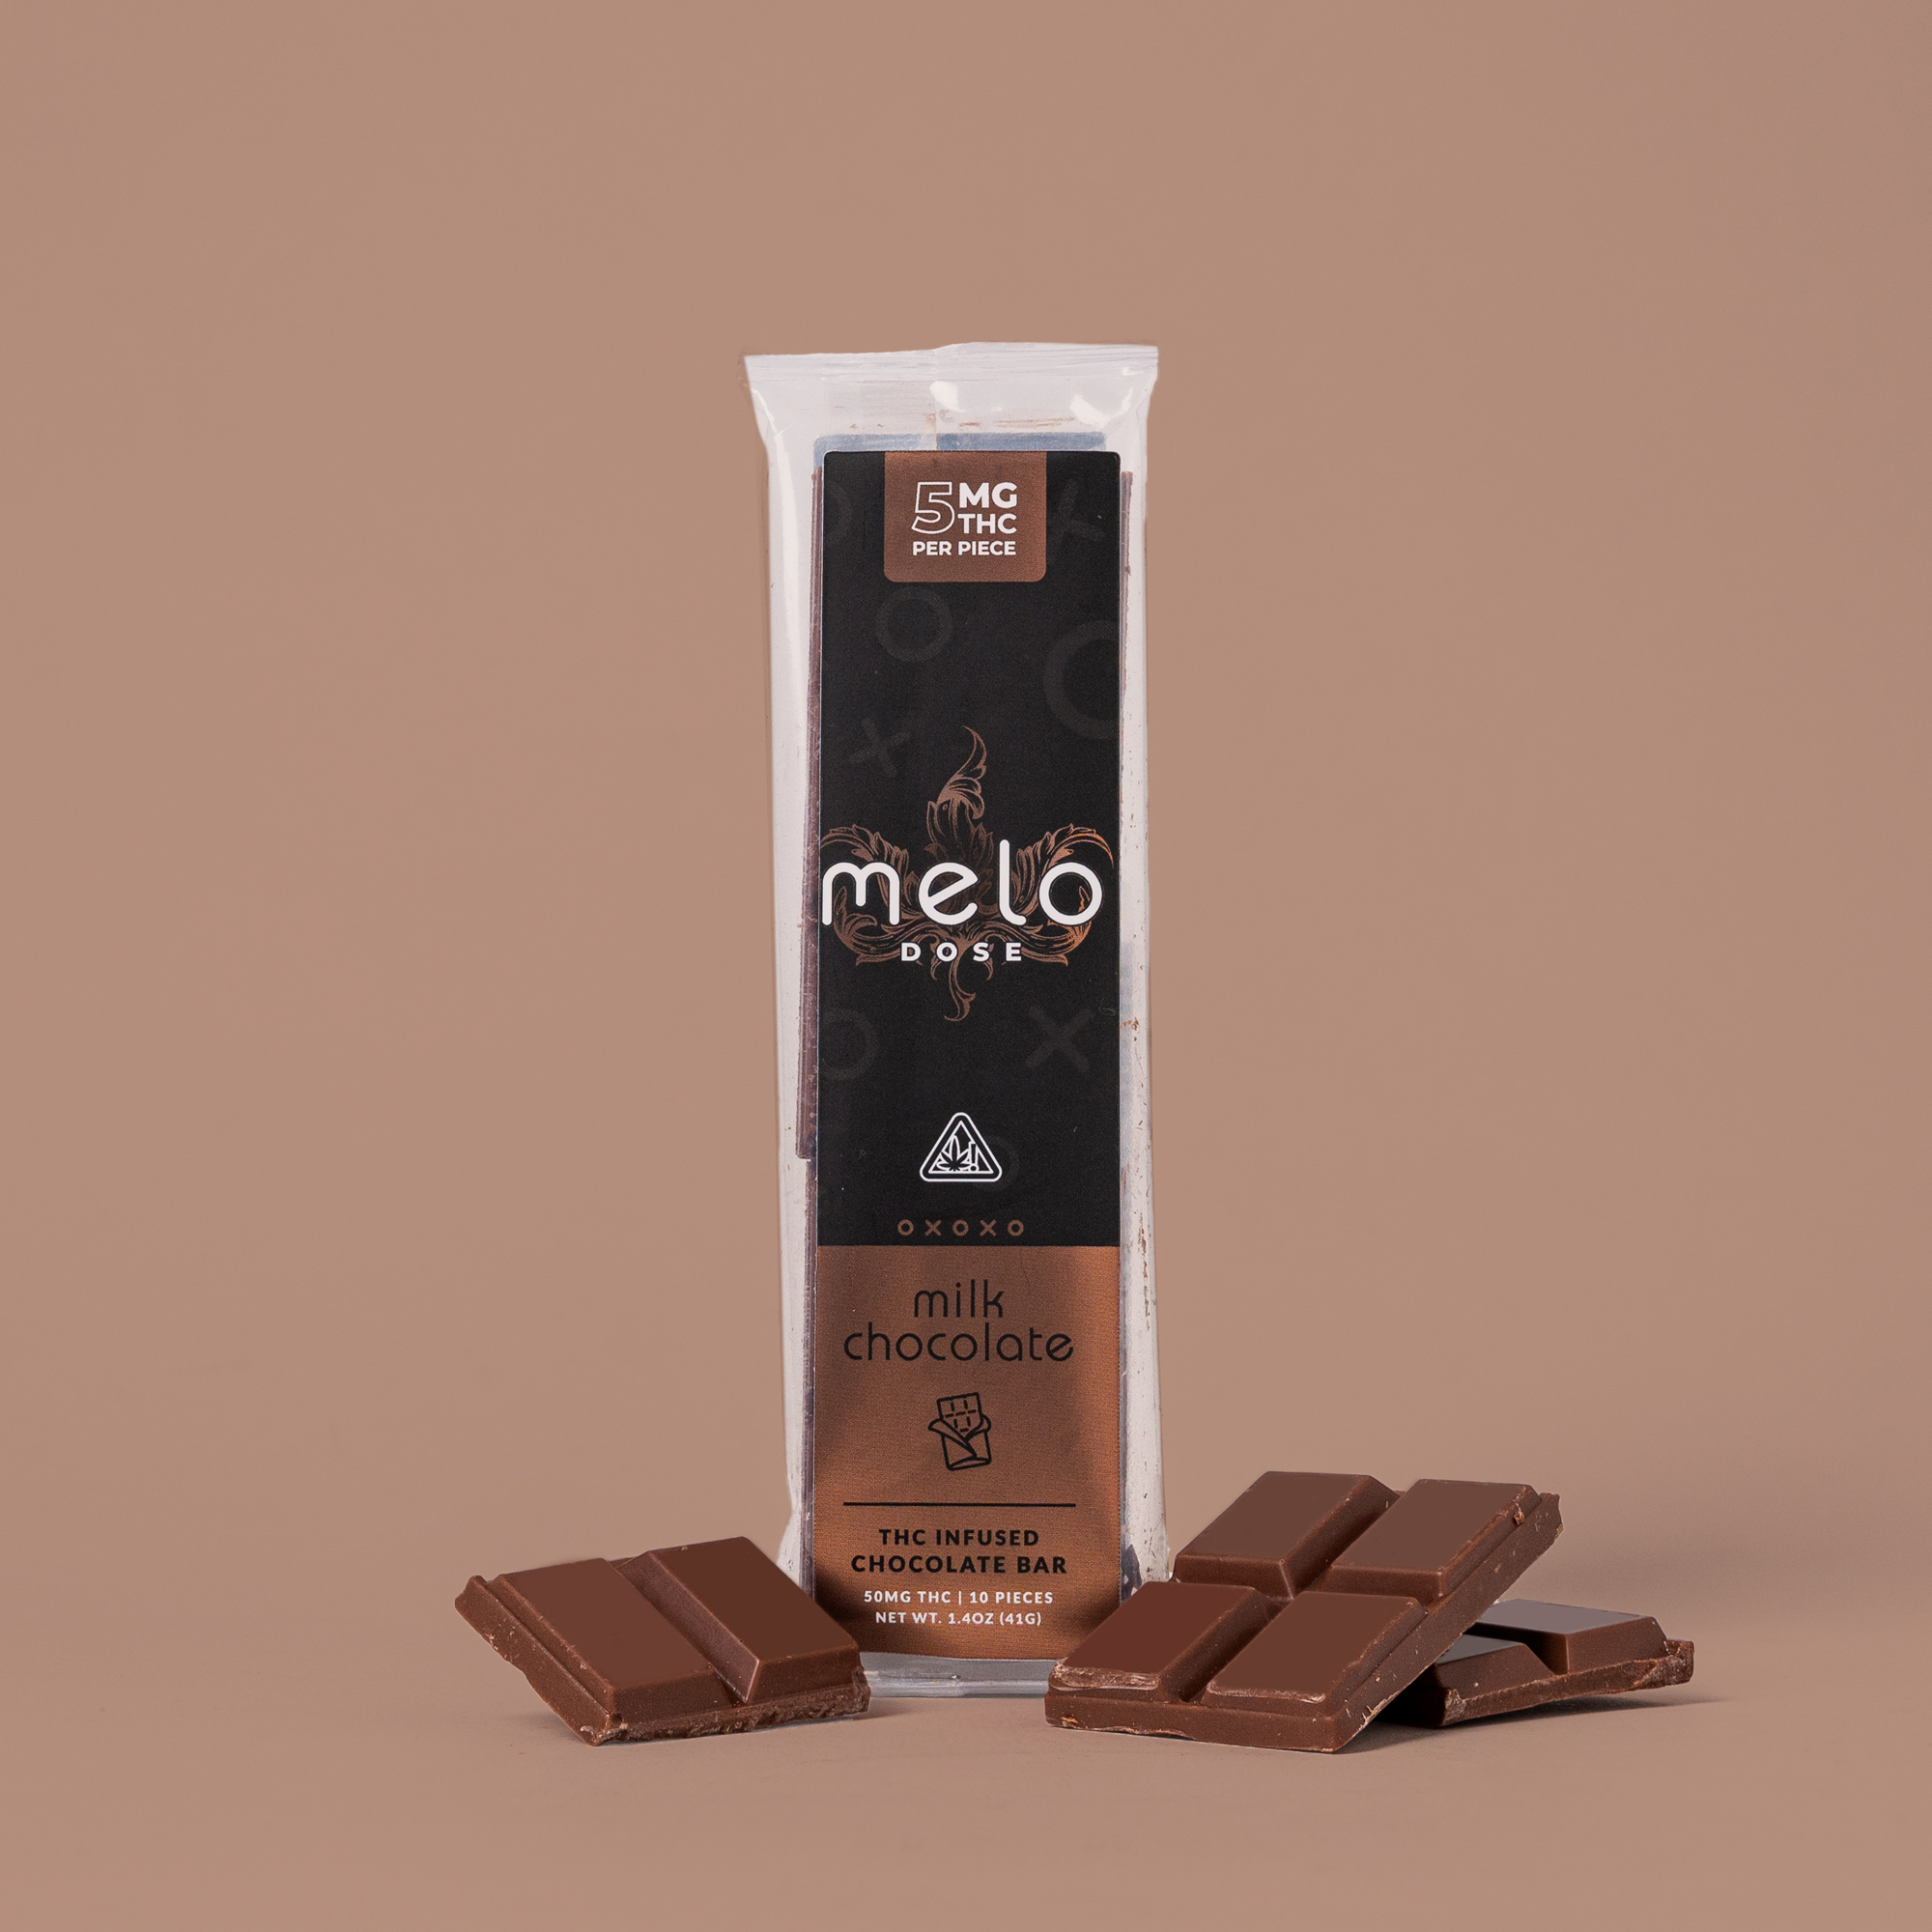 Melo Dose Milk Chocolate Bar 50MG Delta-9 THC Sweets Best Price